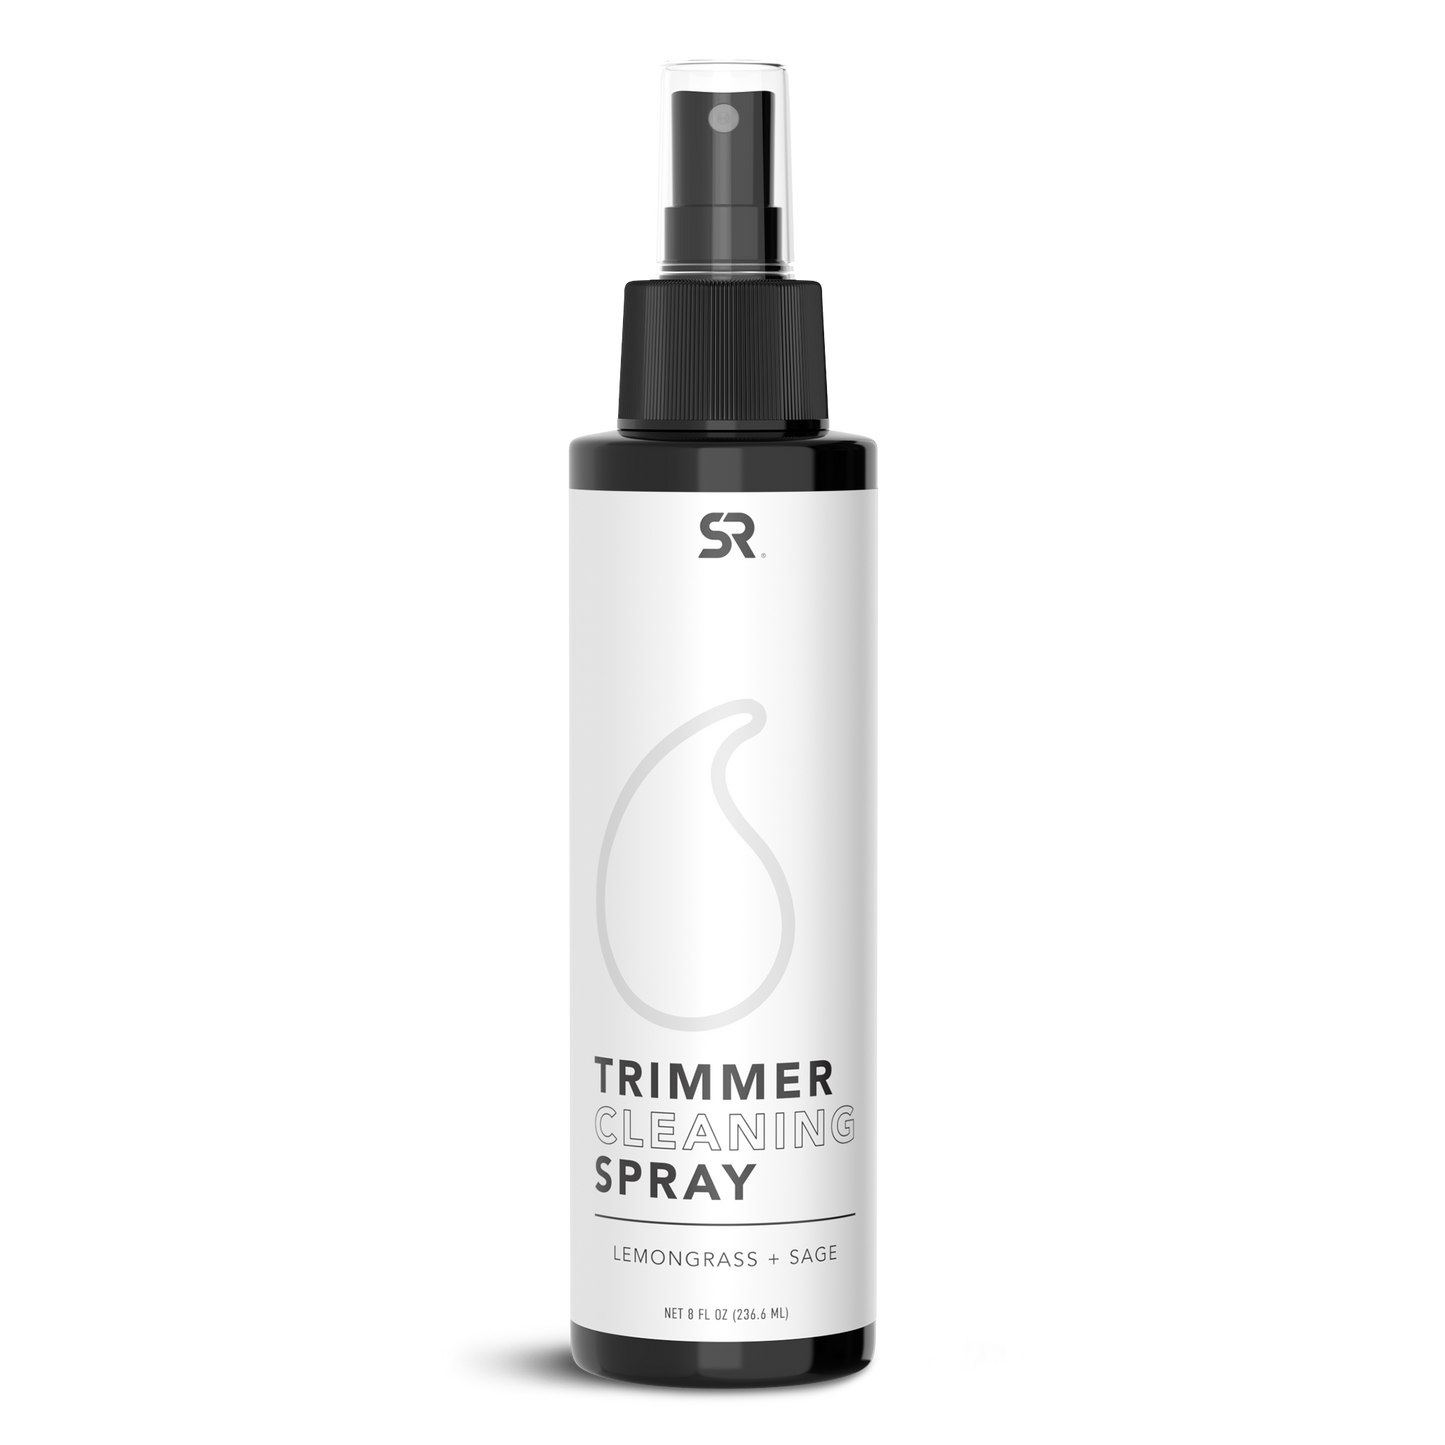 Sports Research Trimmer Cleaning Spray -Lemongrass + Sage